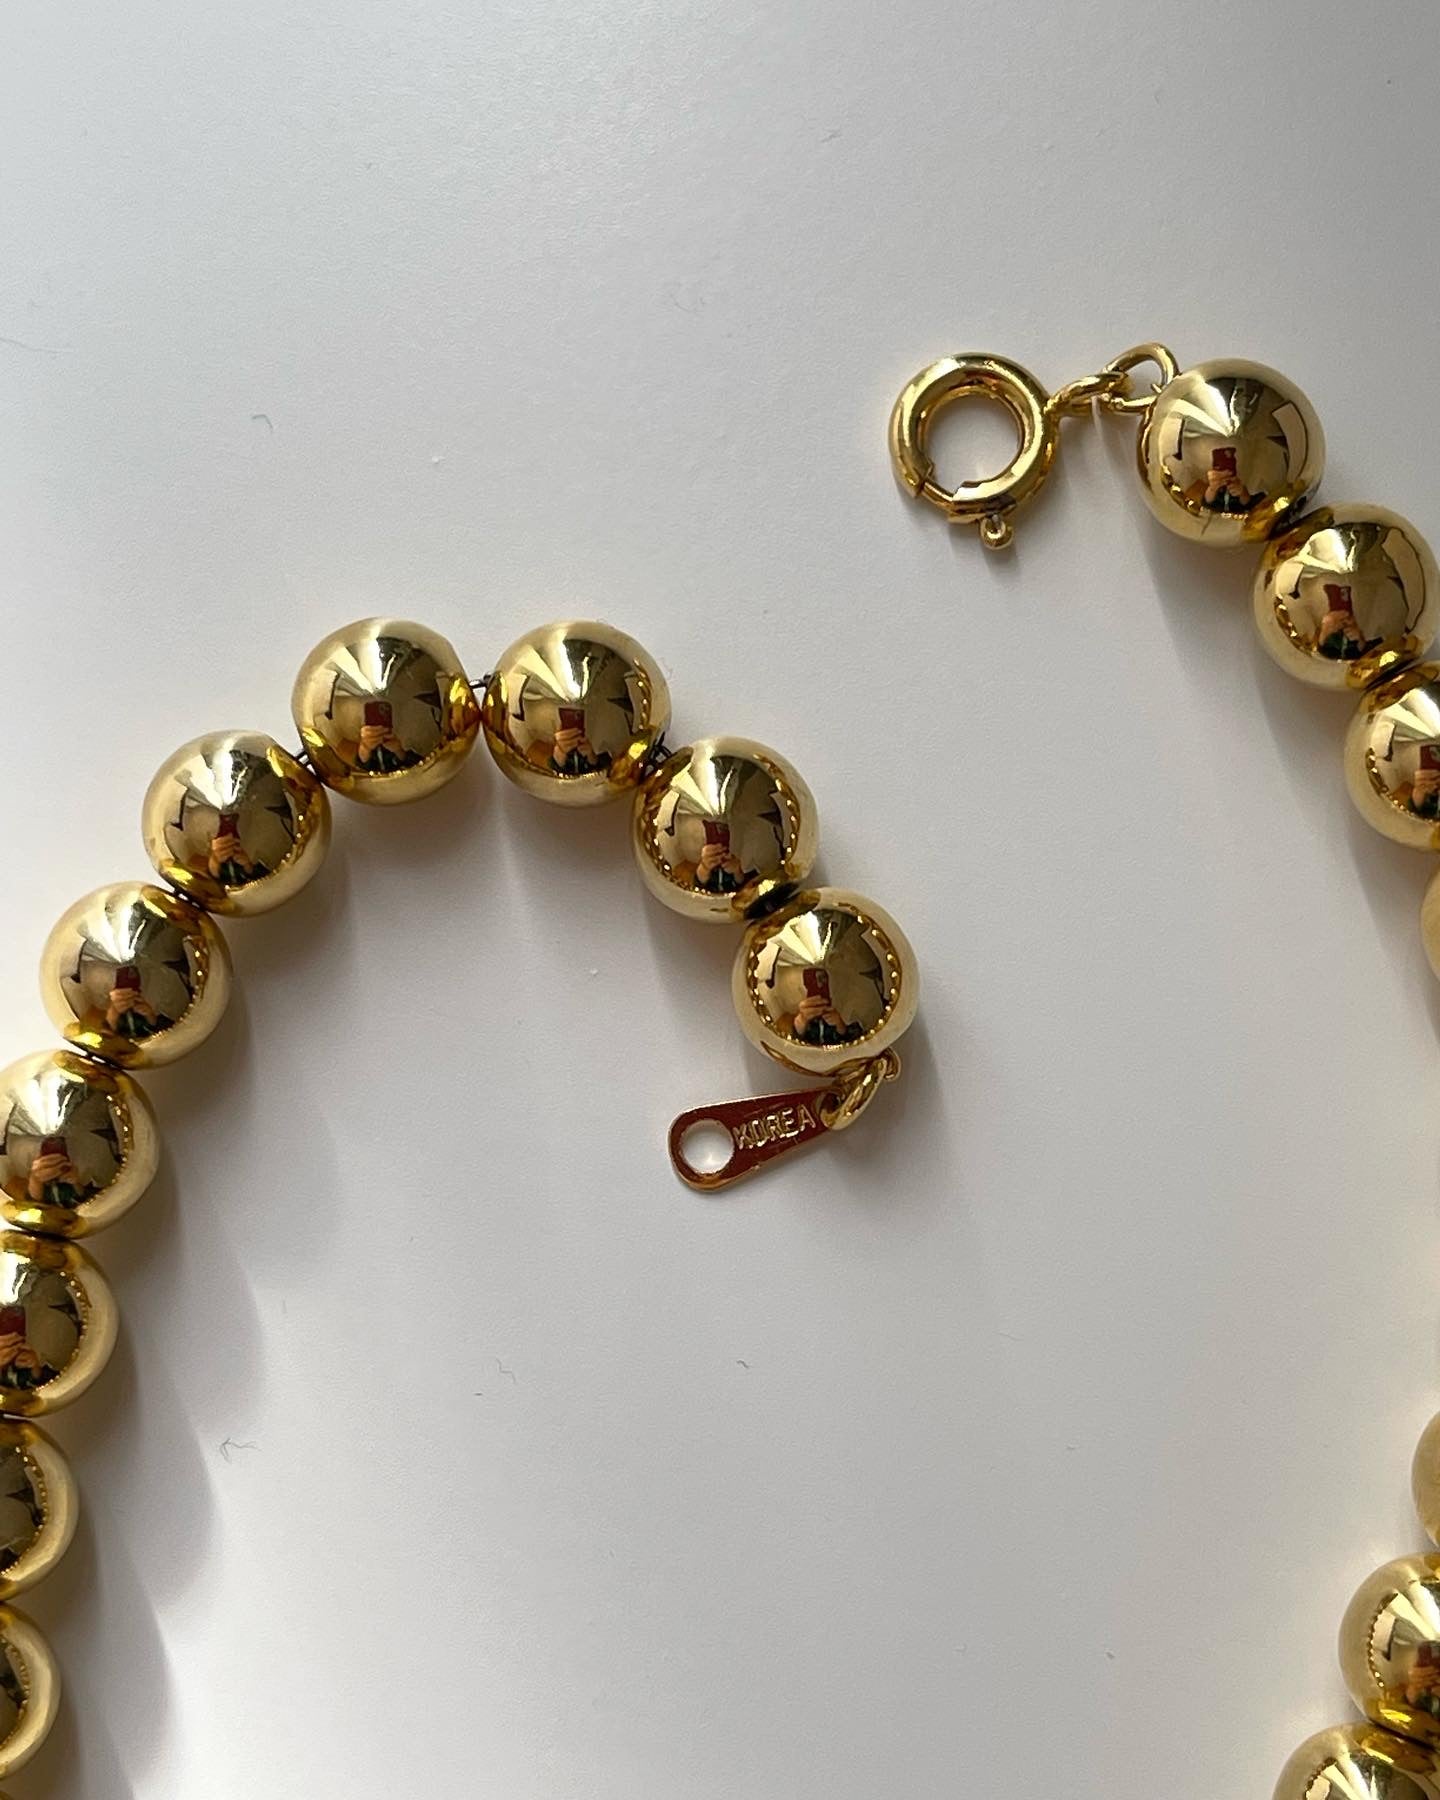 Lovely vintage gold-tone necklace in a simple beaded design (metal+plastic)